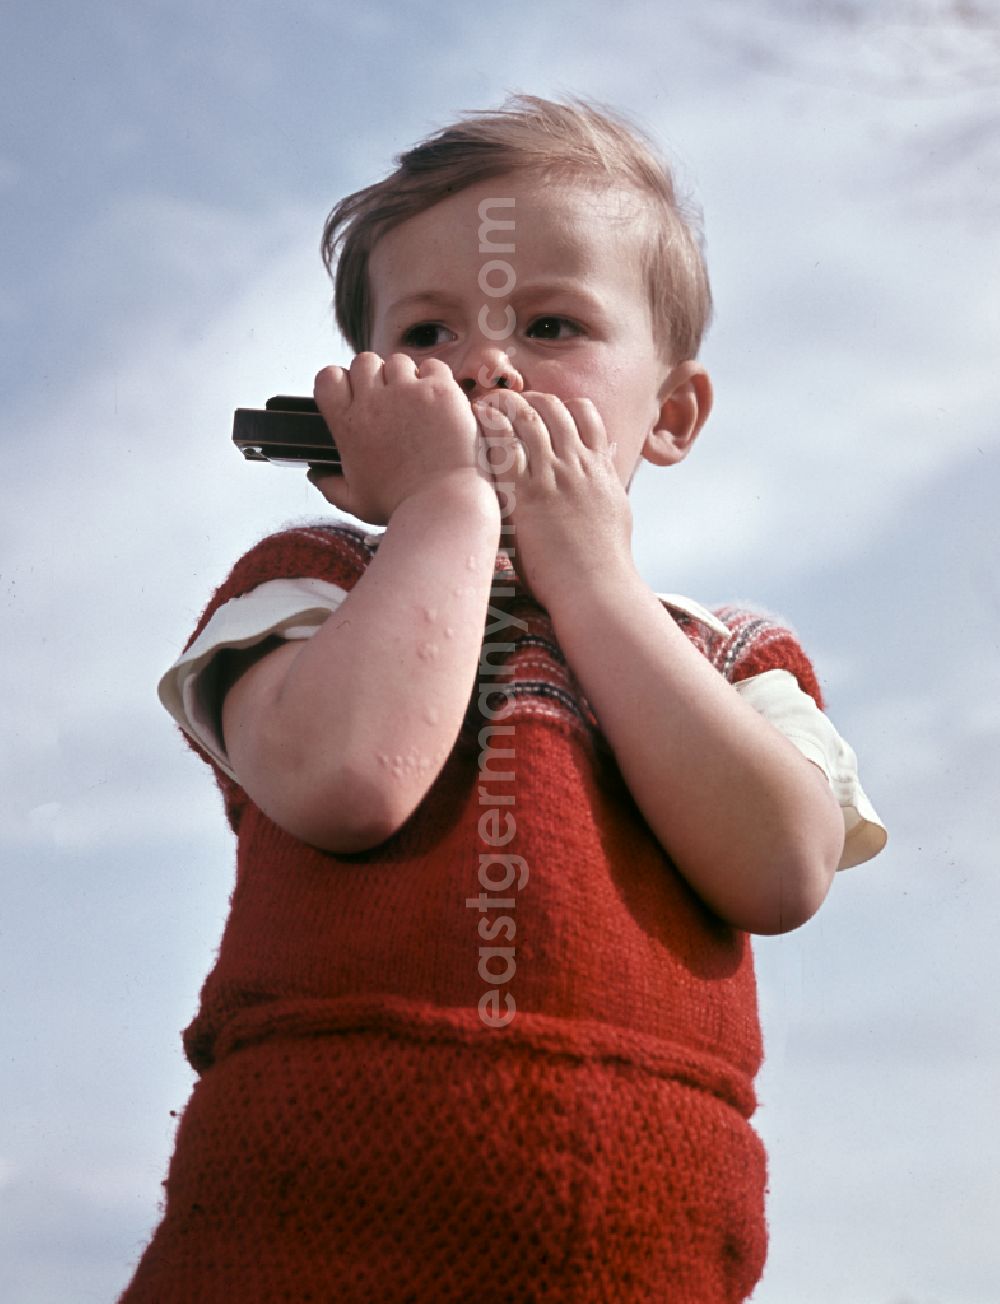 GDR picture archive: Coswig - A little boy plays a harmonica in Coswig, Saxony in the territory of the former GDR, German Democratic Republic